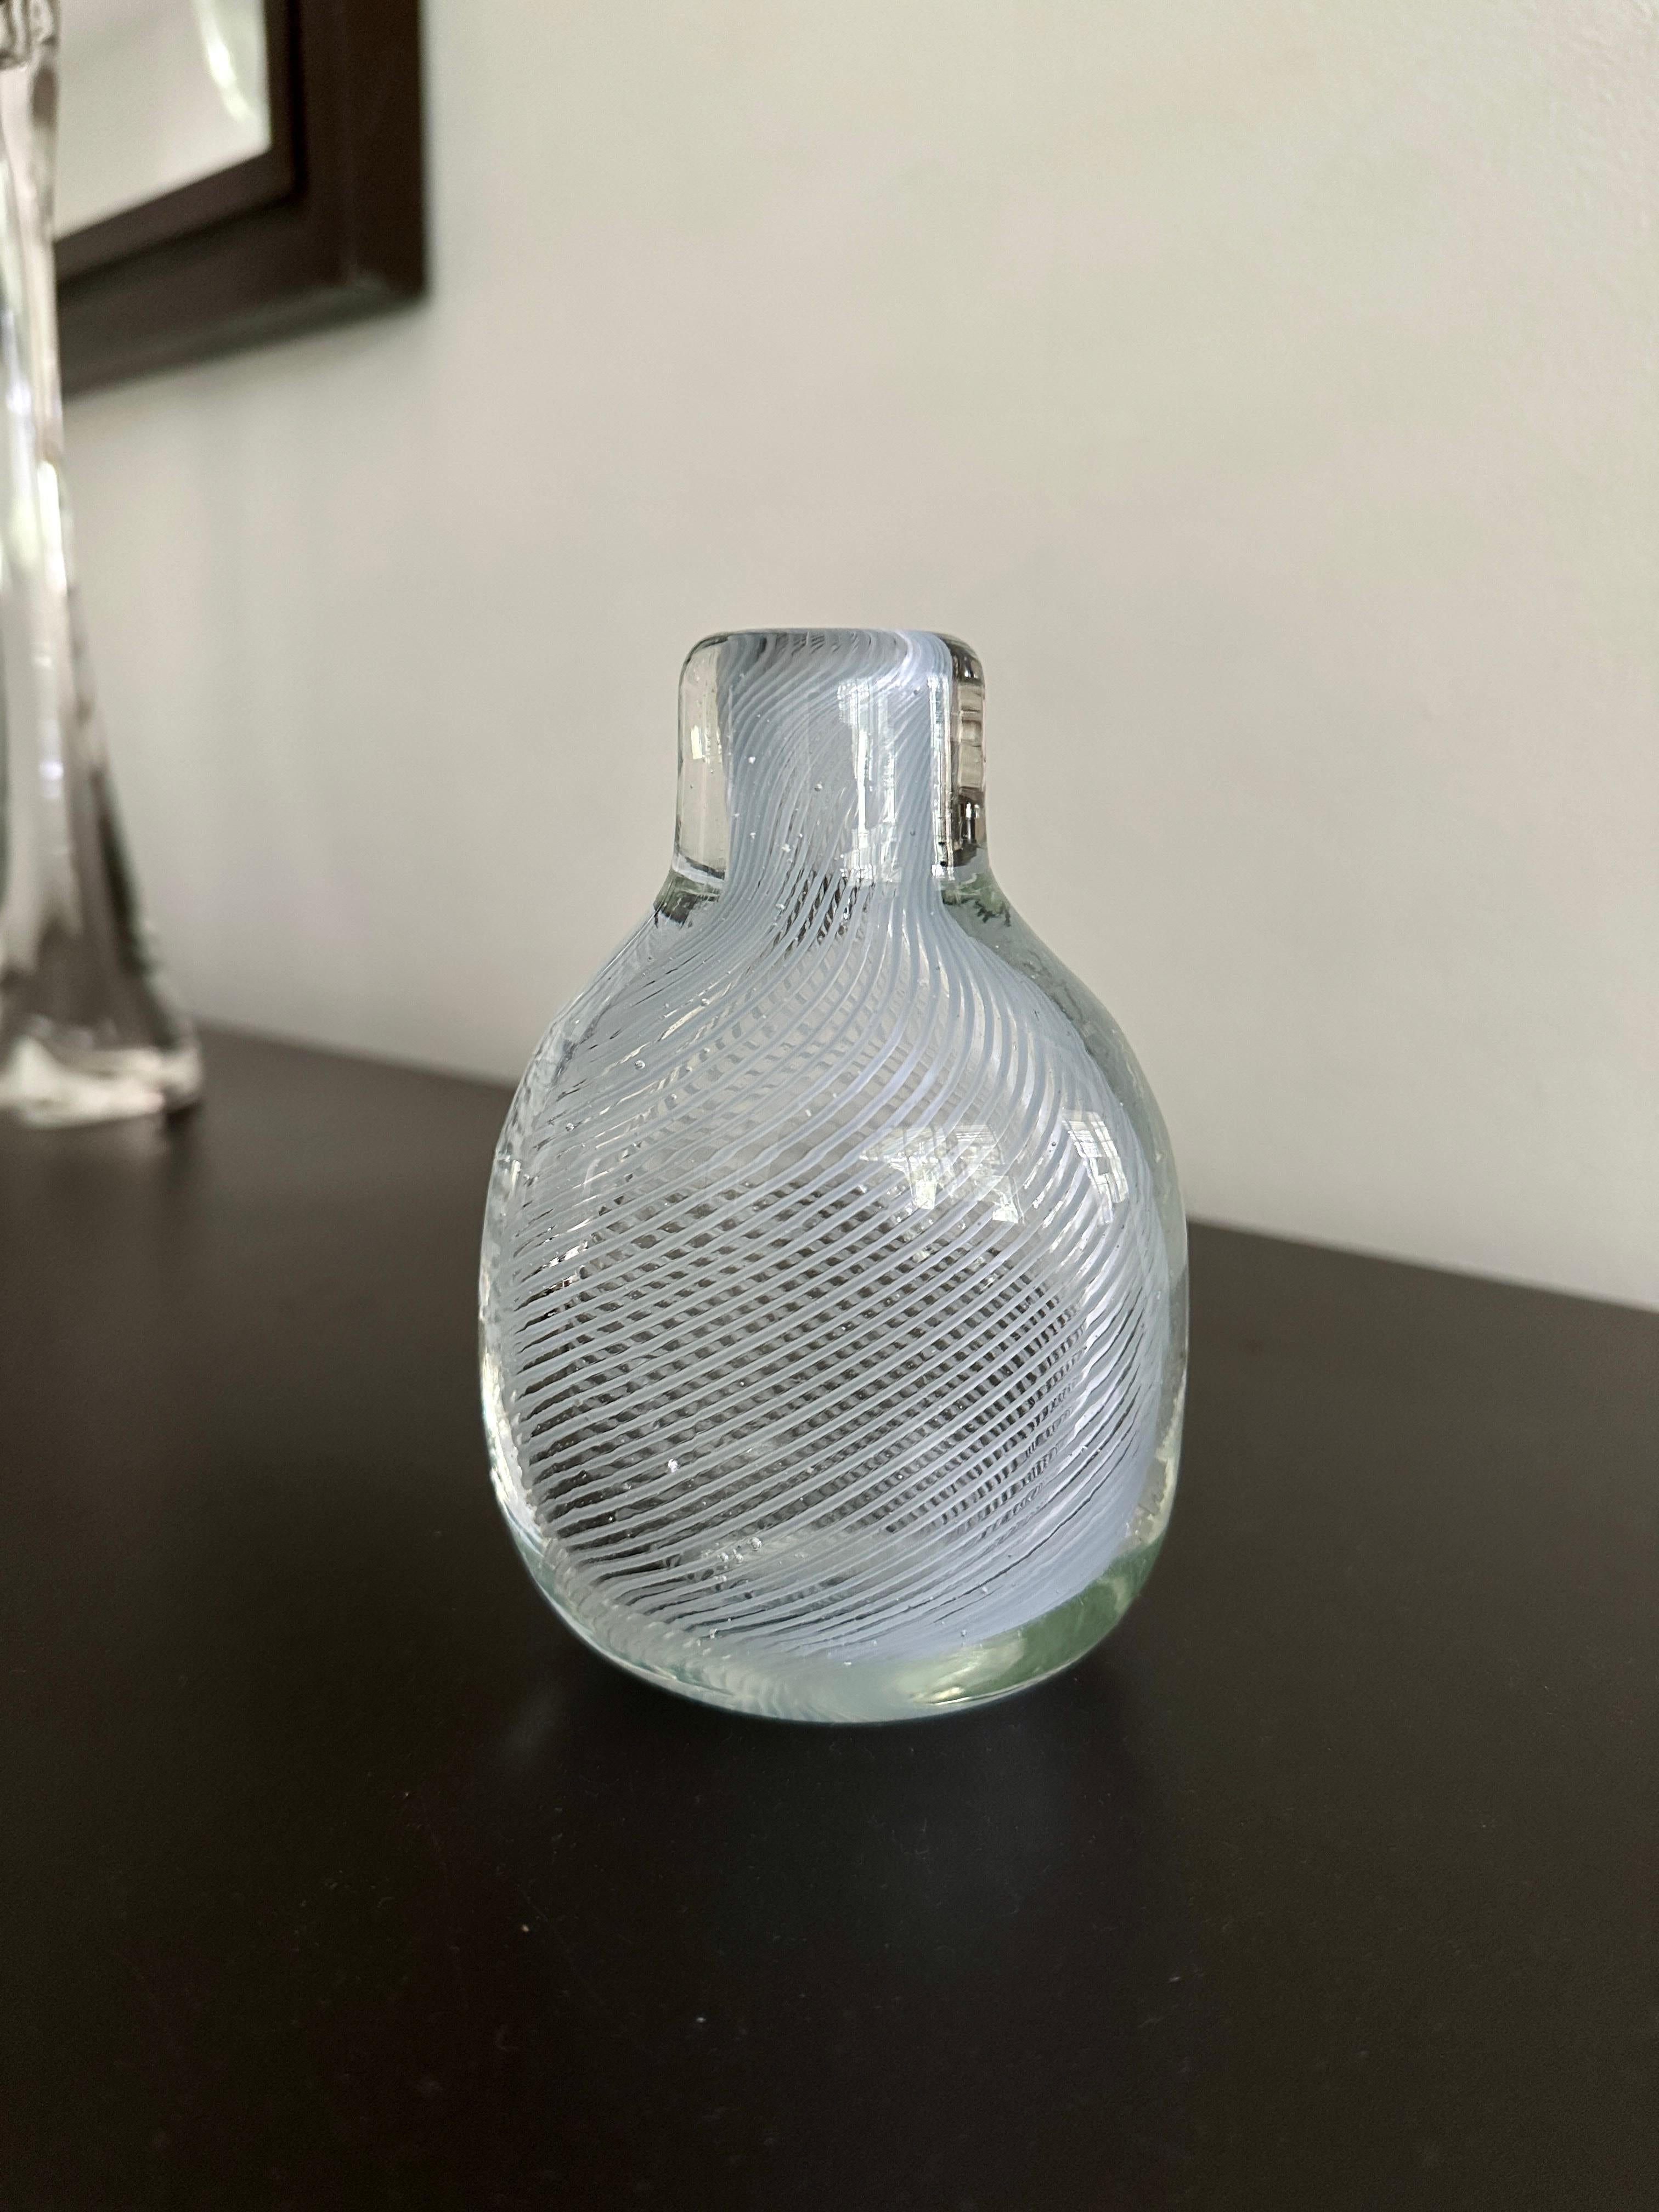 A bottle designed by Carlo Scarpa for Venini in the mid 1930s. The bottle is a very faint blue green color and displays the mezza filigrana method of glass blowing. A small treasure that does not show up often. The bottle is acid etched on the